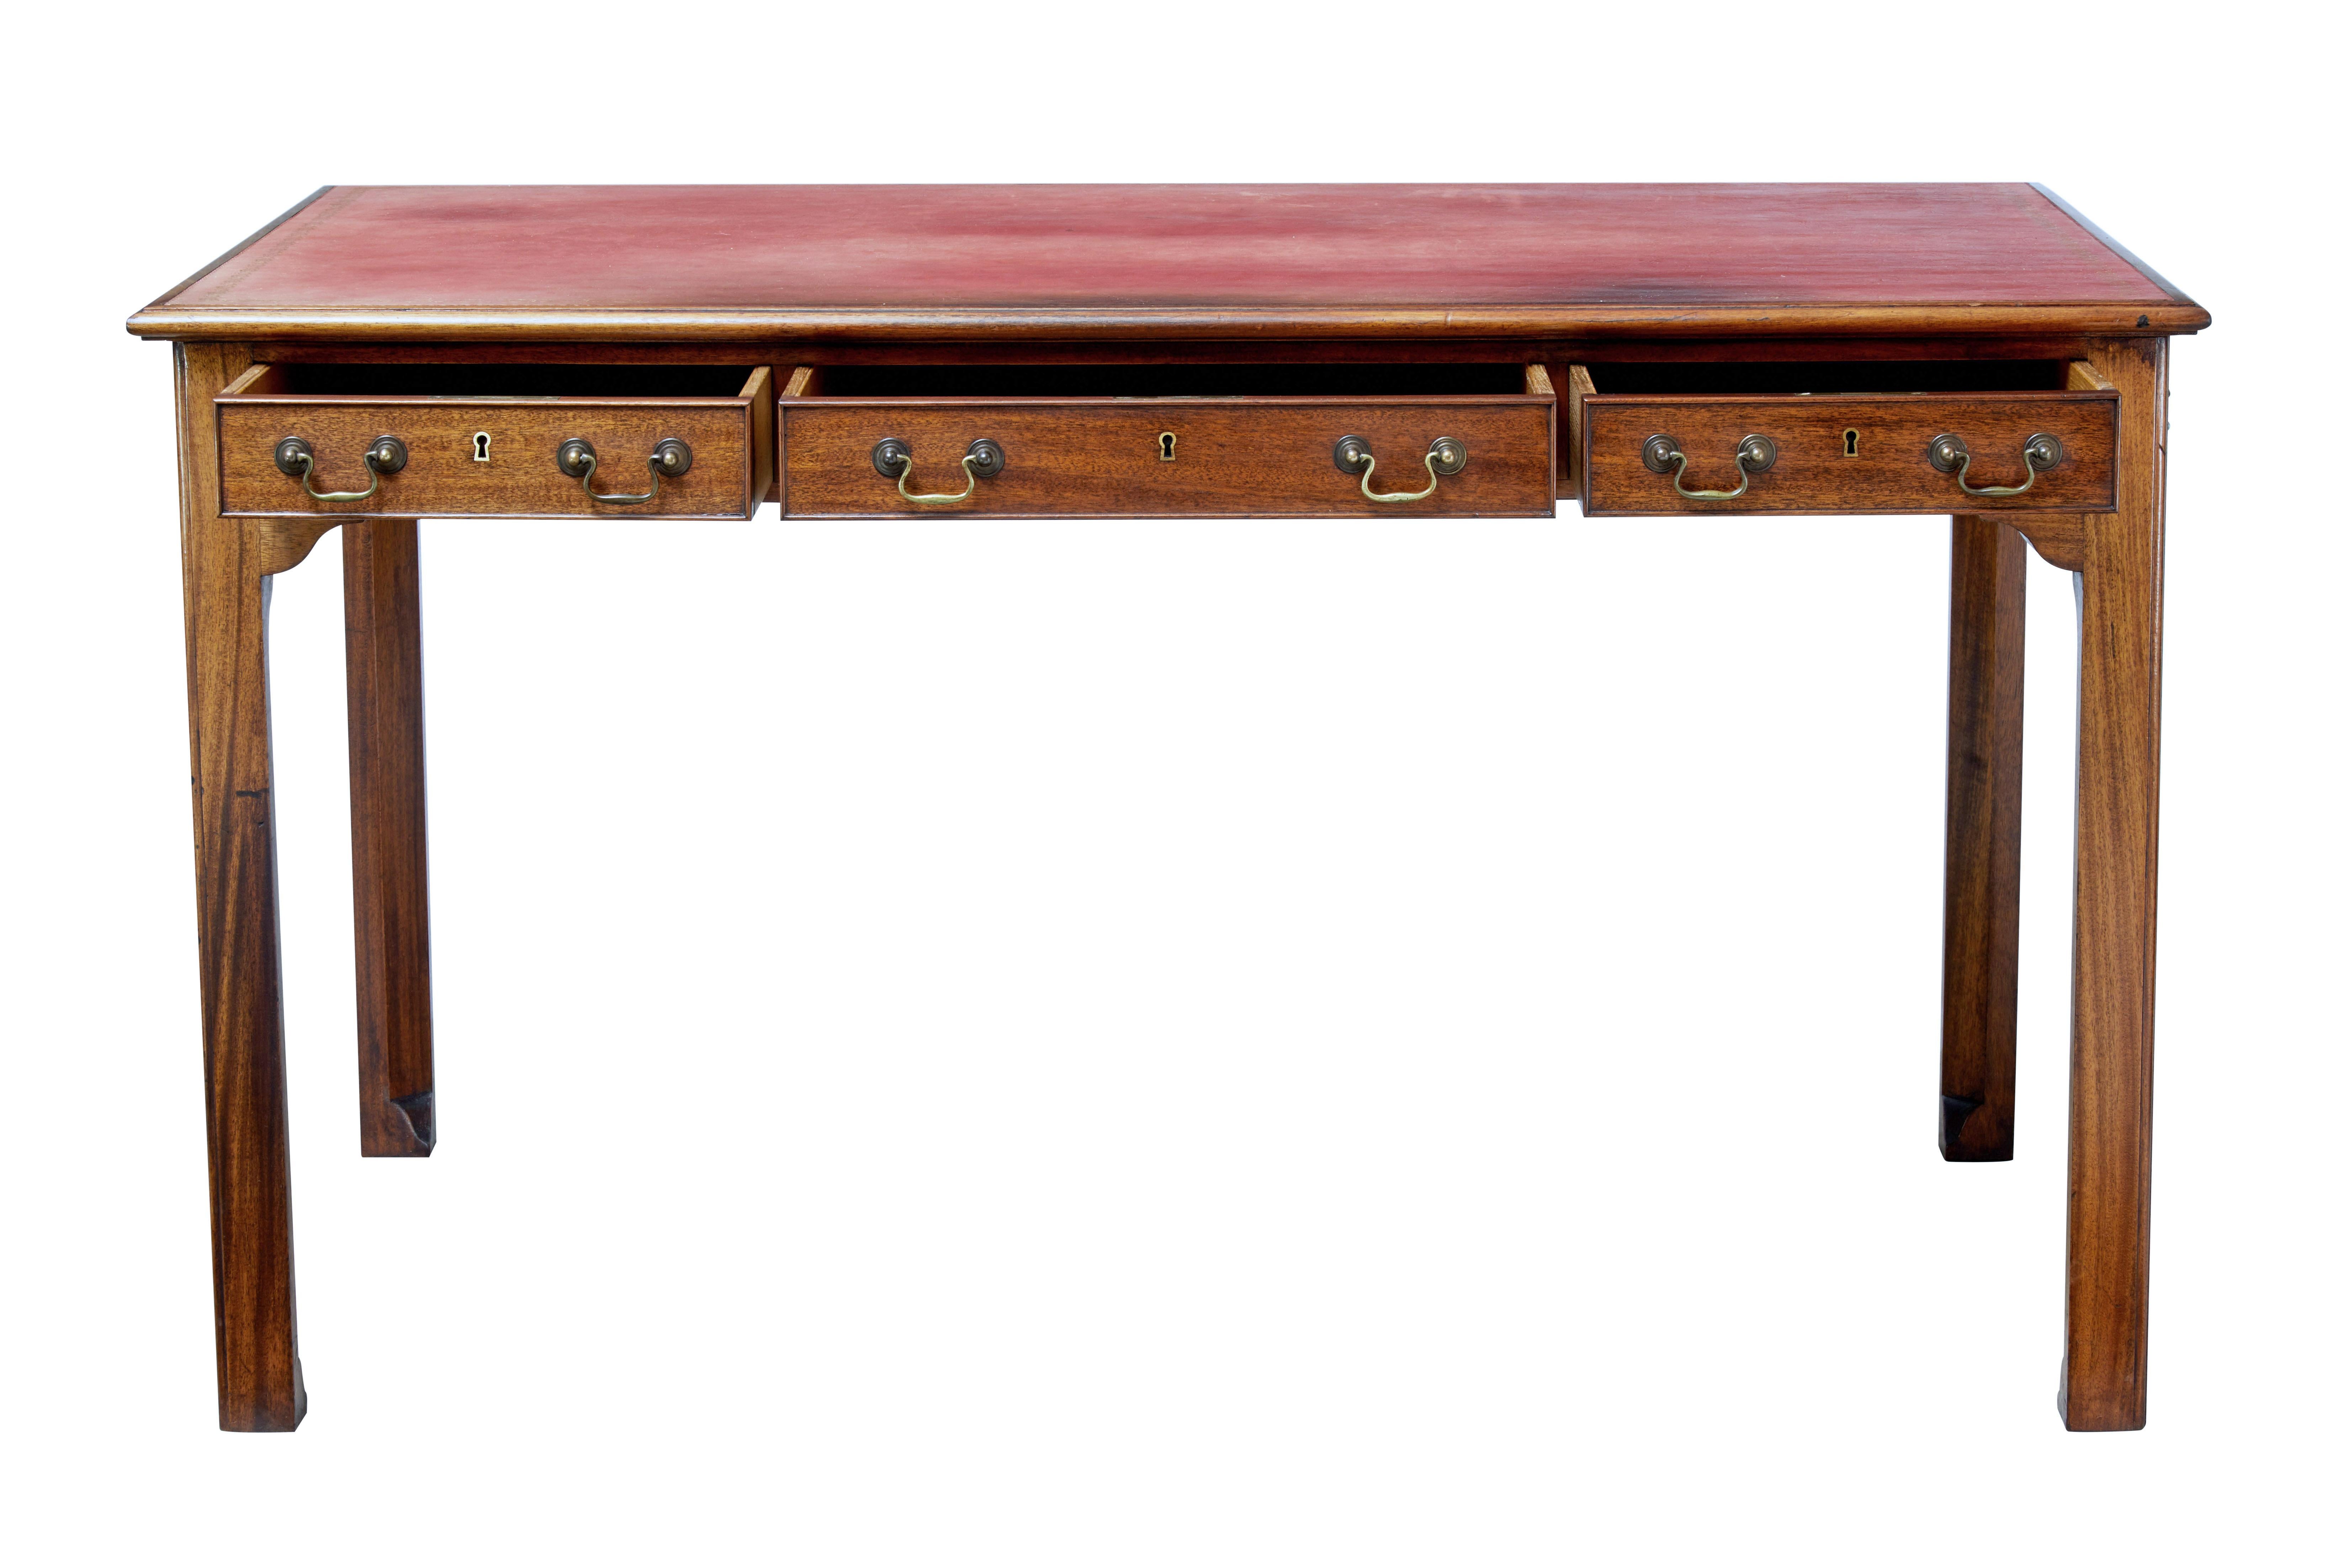 Late George III English writing table with leather top, circa 1810.

Desk front with 3 drawers below the writing surface and original brass swan neck handles. Dummy to reverse with further handles to the sides.

Possibly the original red leather